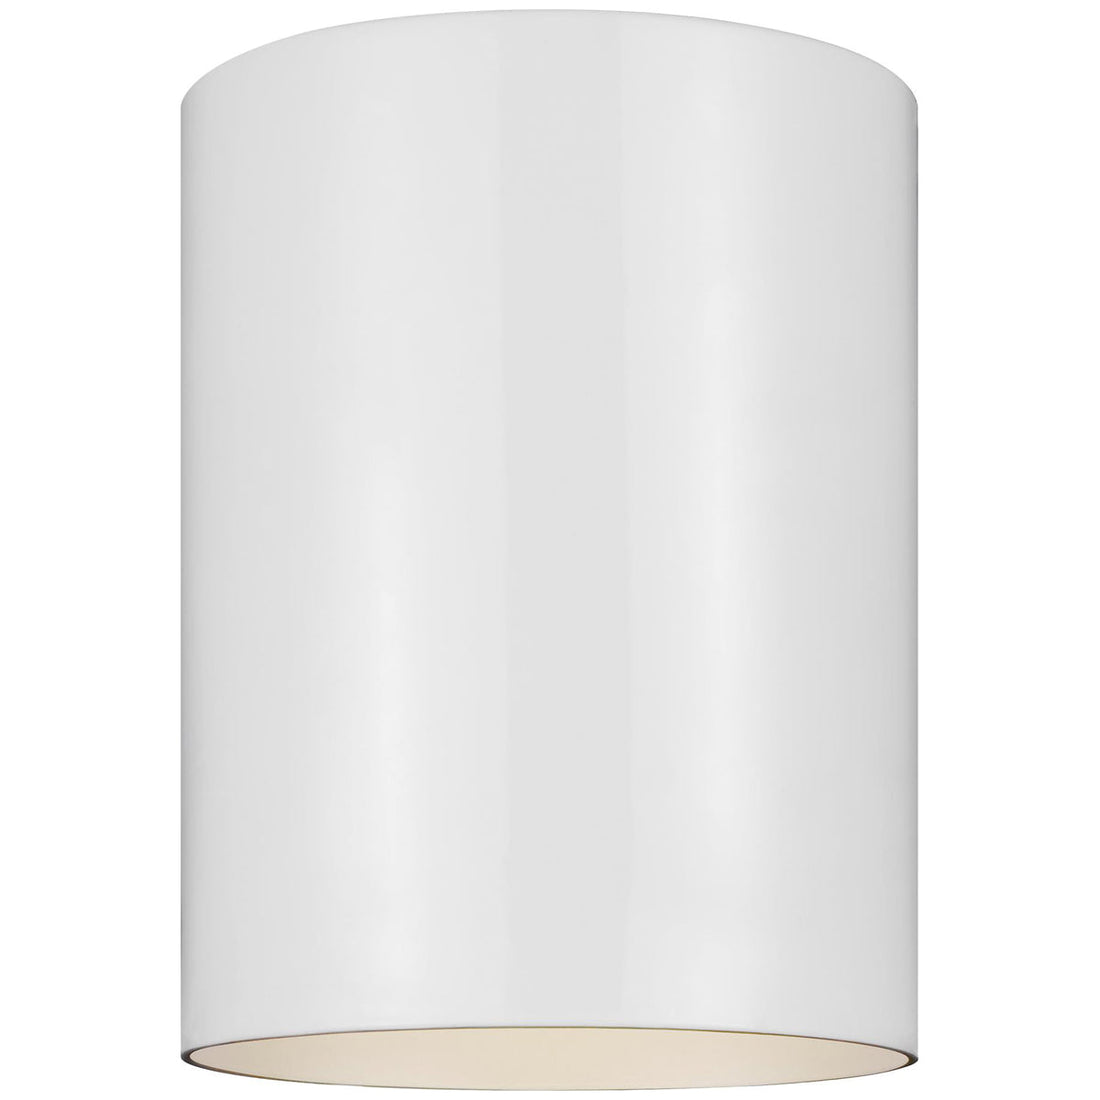 Sea Gull Lighting Outdoor Cylinders Ceiling Flush Mount without Bulb